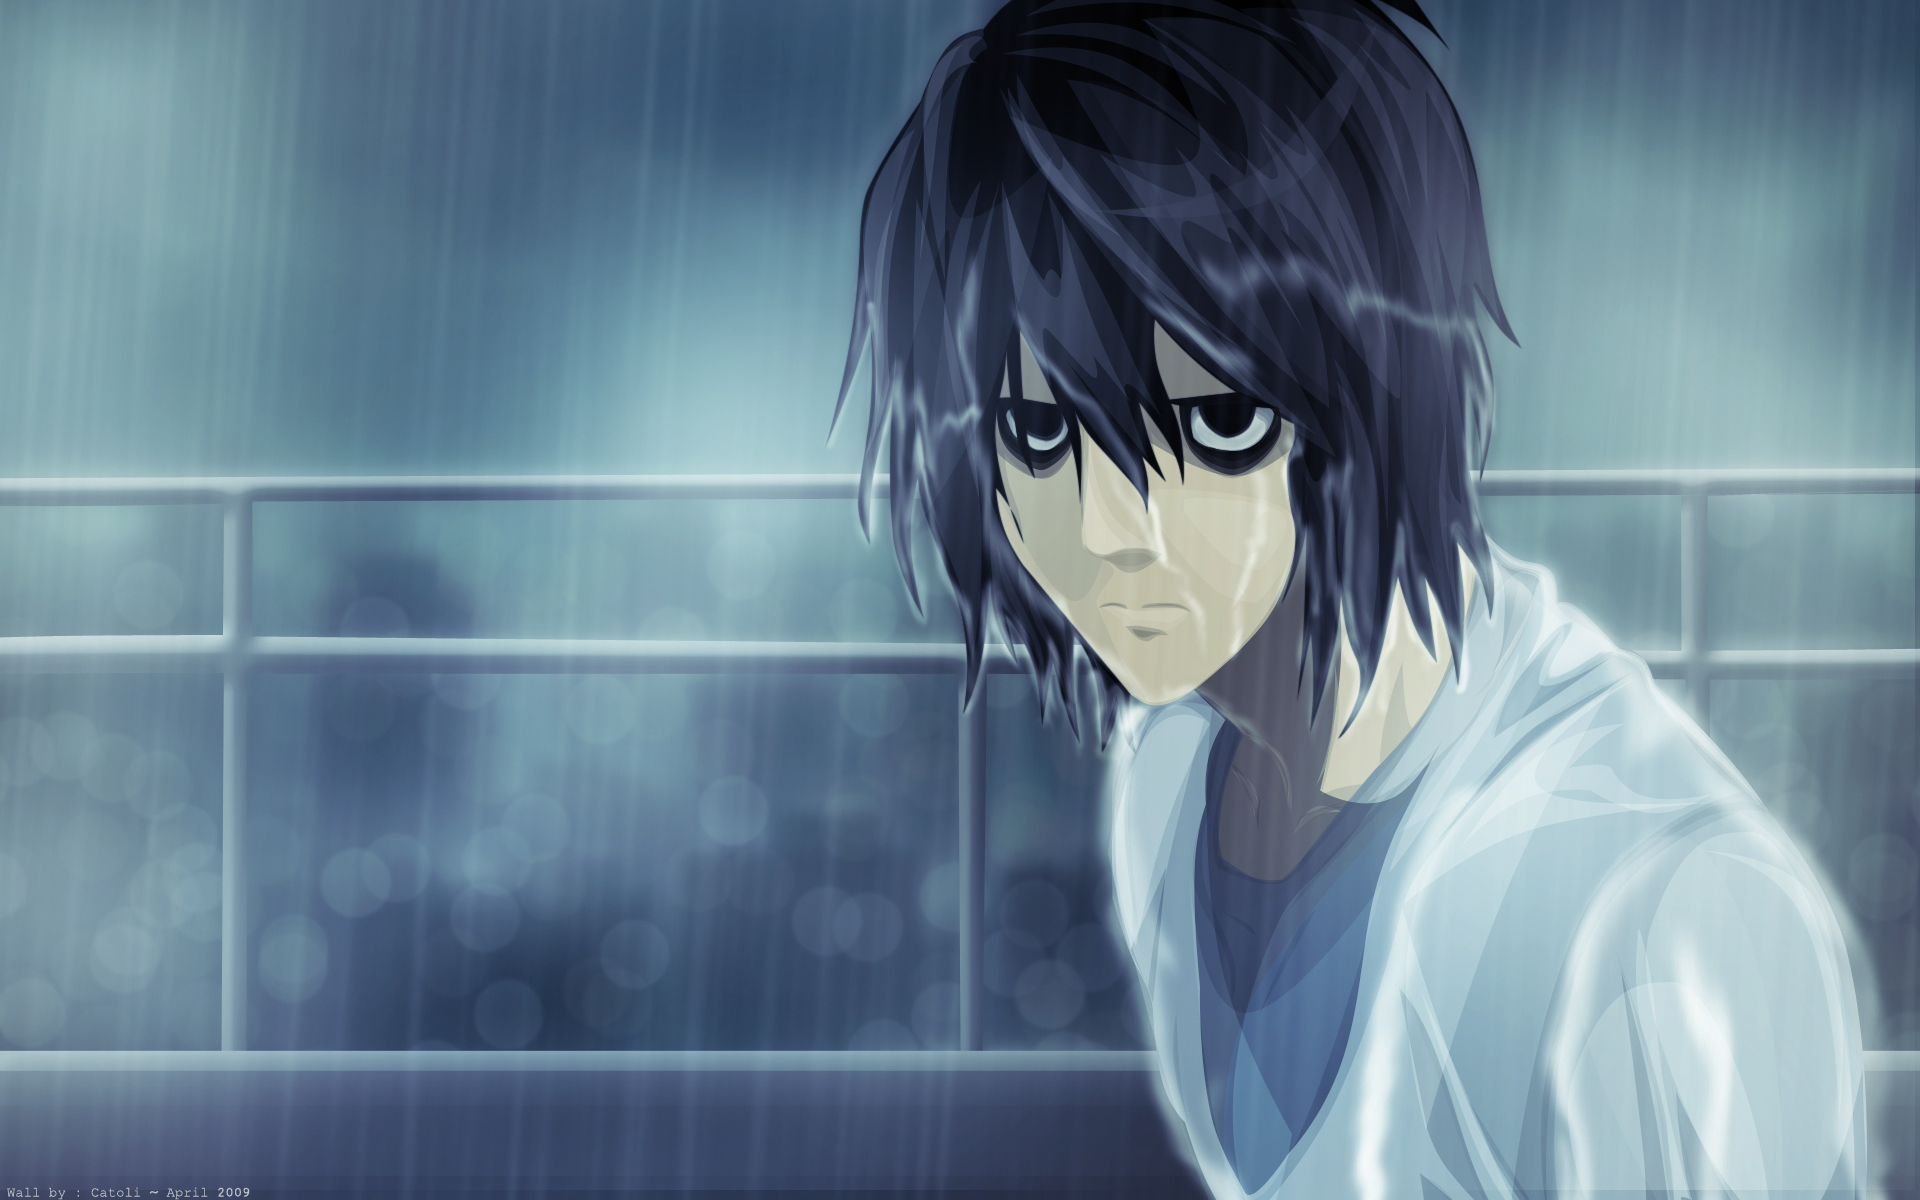 Anime character L from Death Note, depicted as desktop wallpaper.